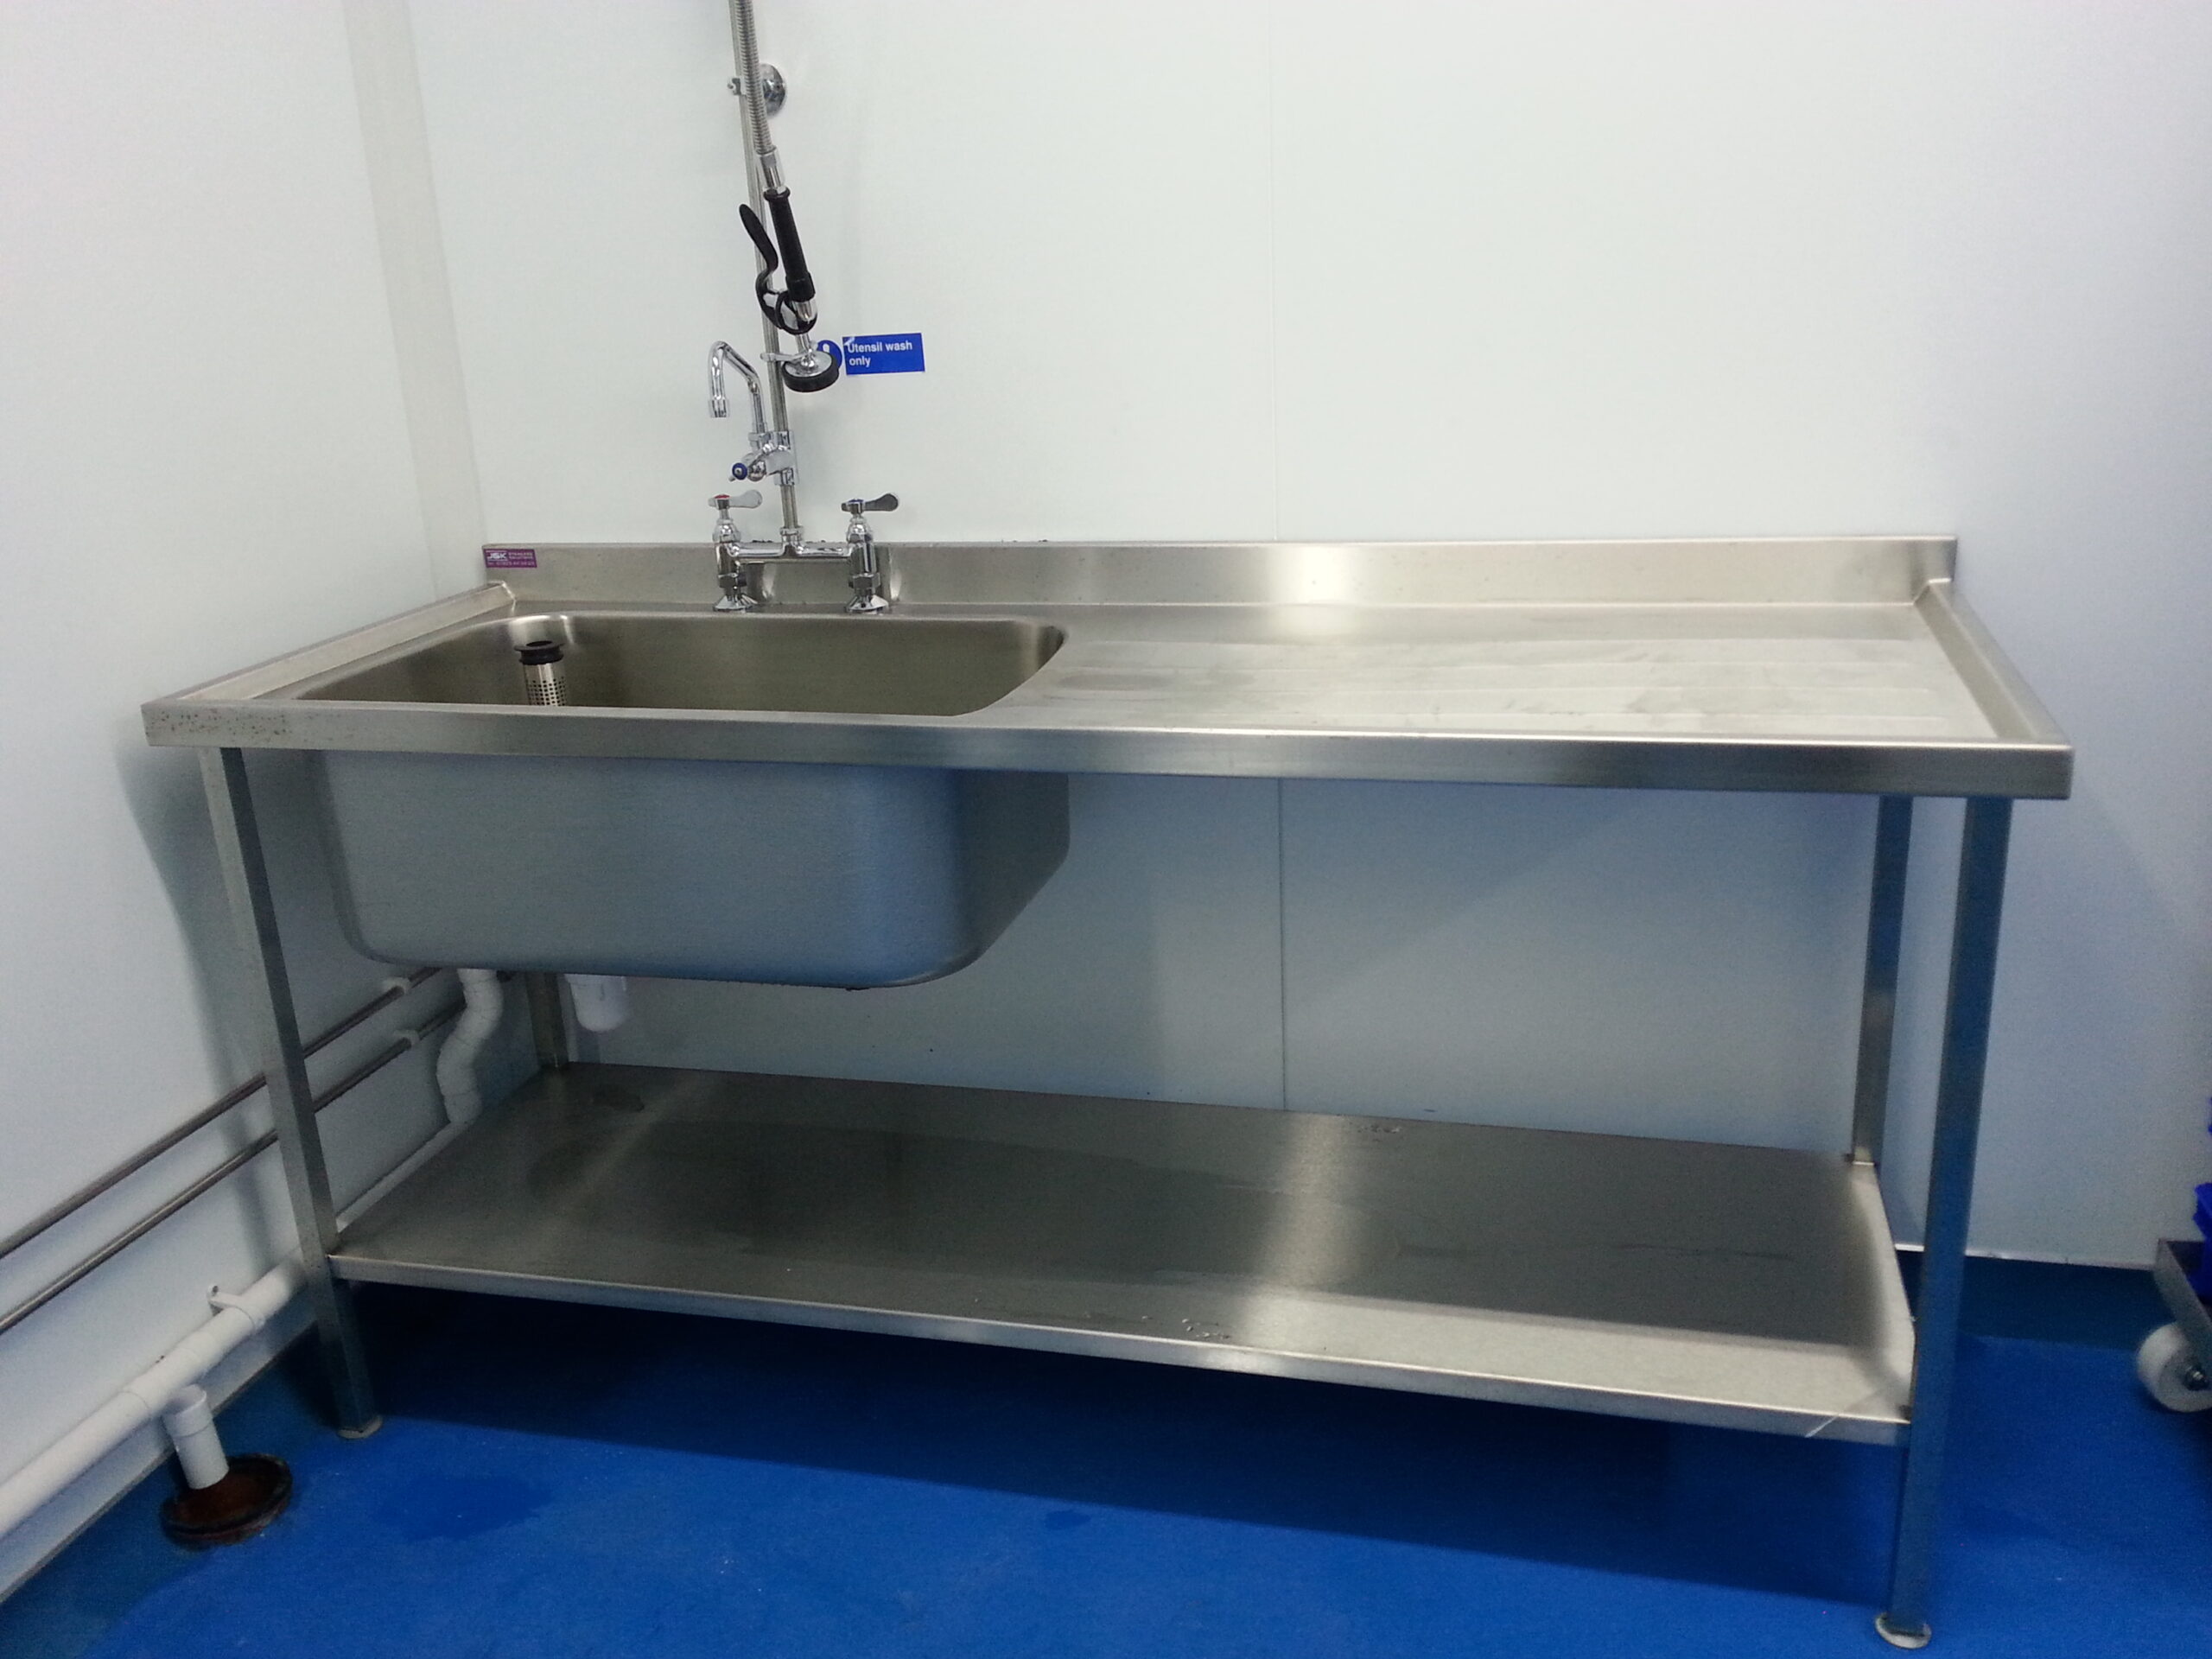 catering kitchen sink stainless steel